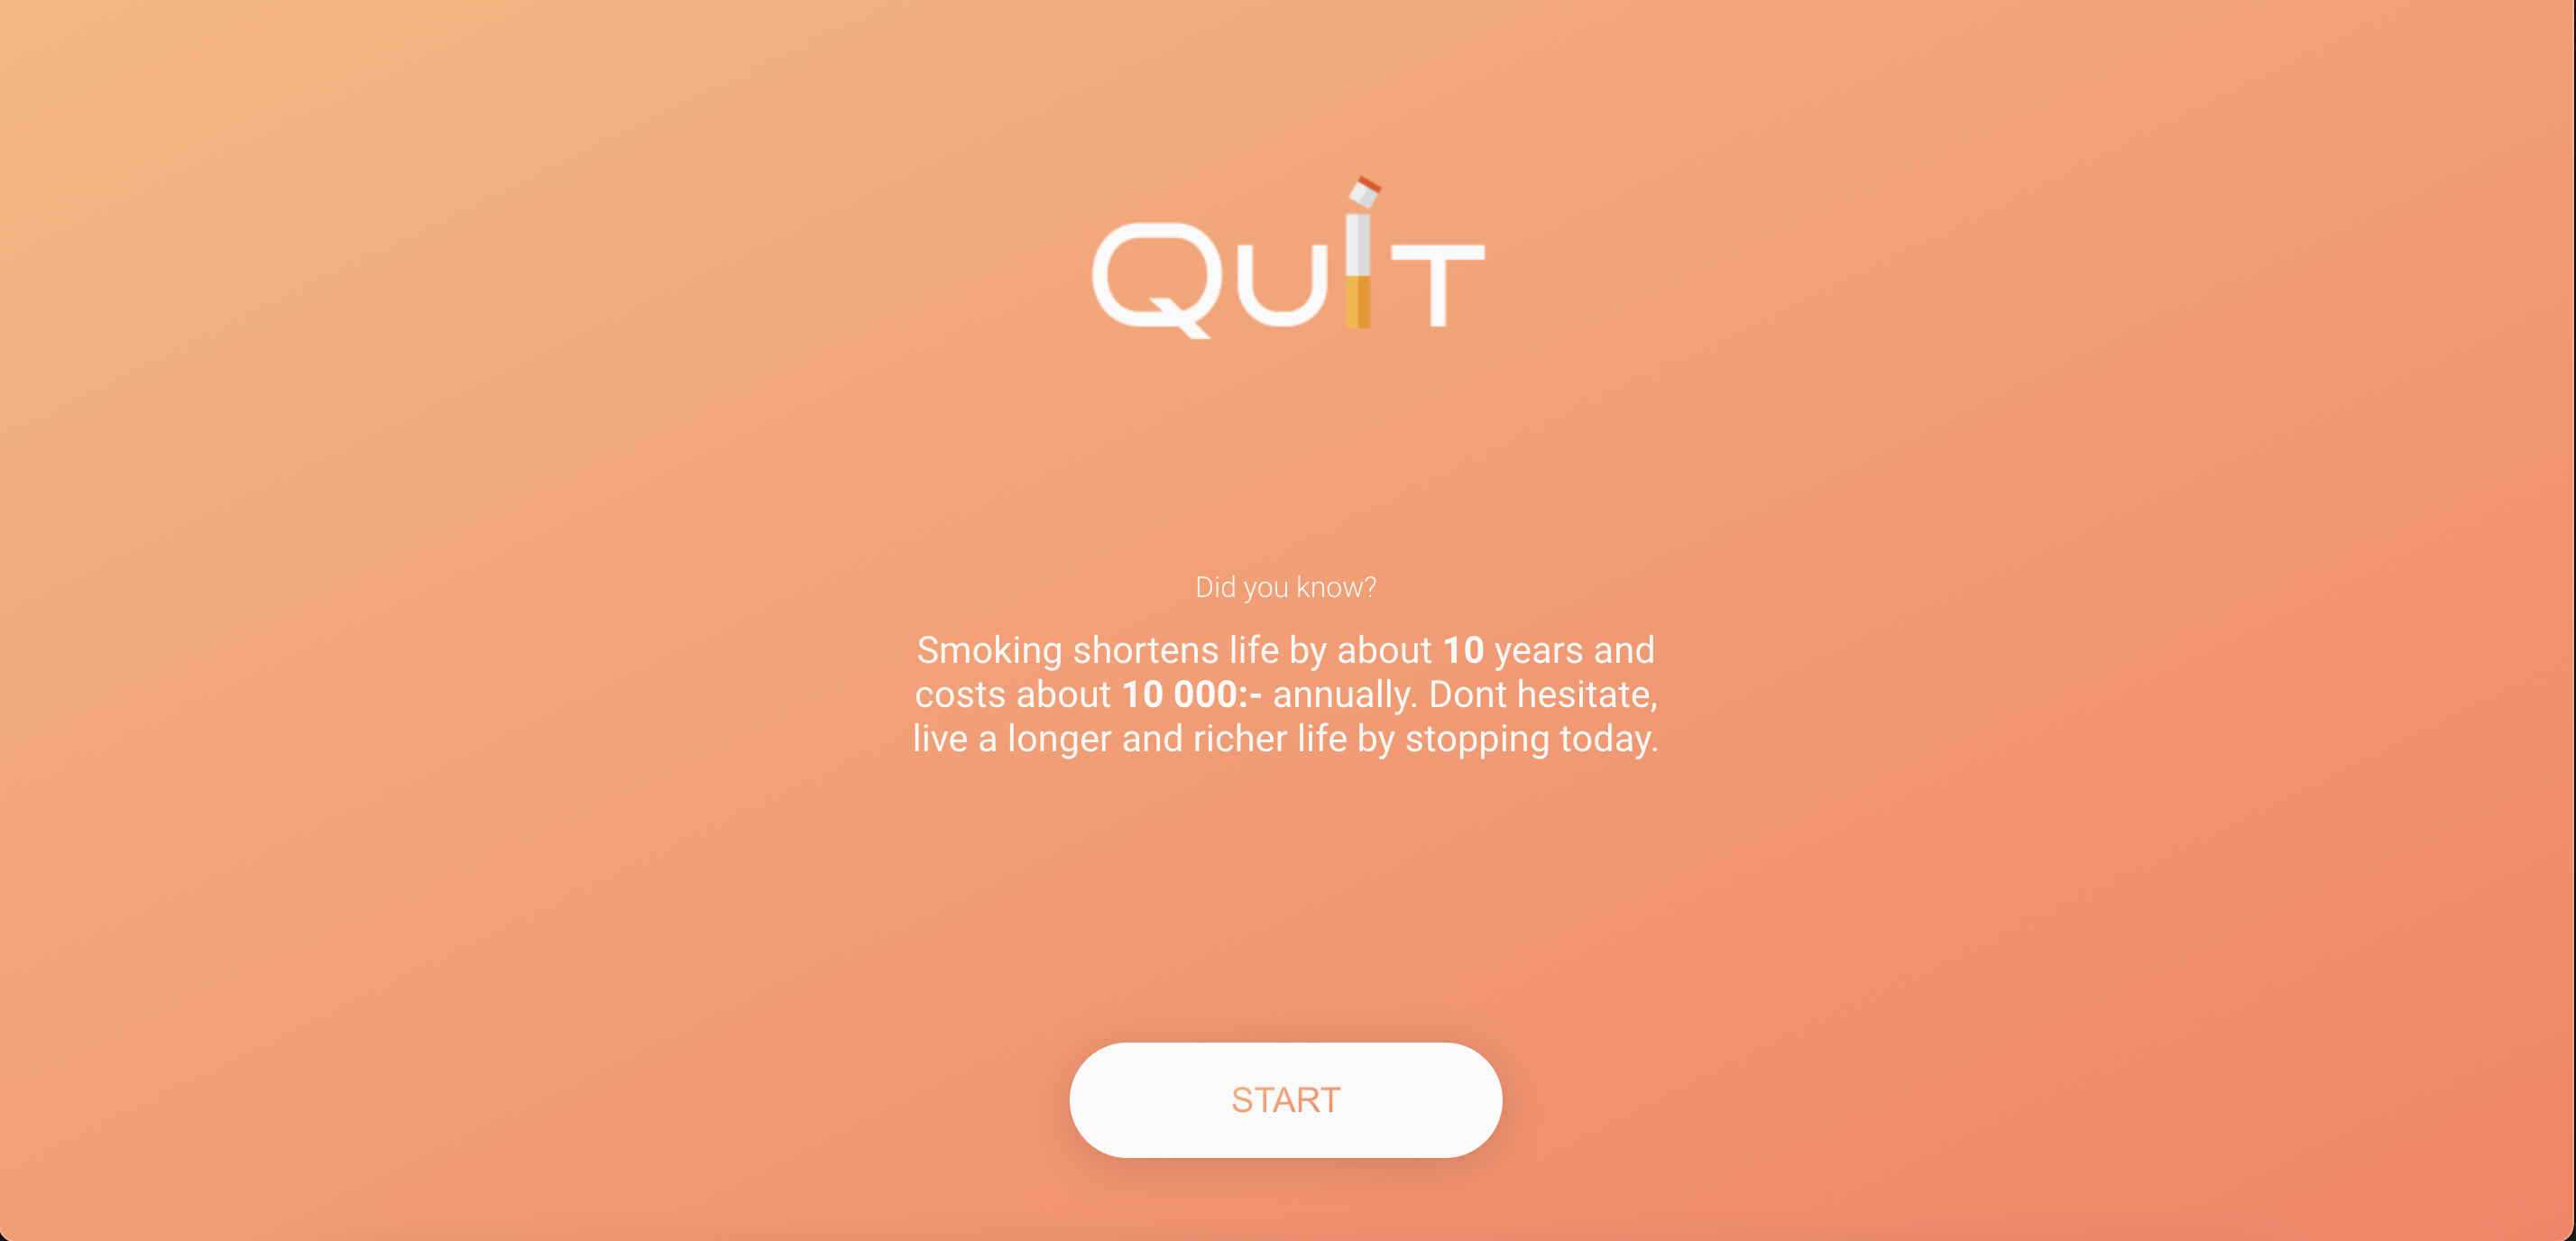 QUIT - to help you quit smoking made in react and typescript